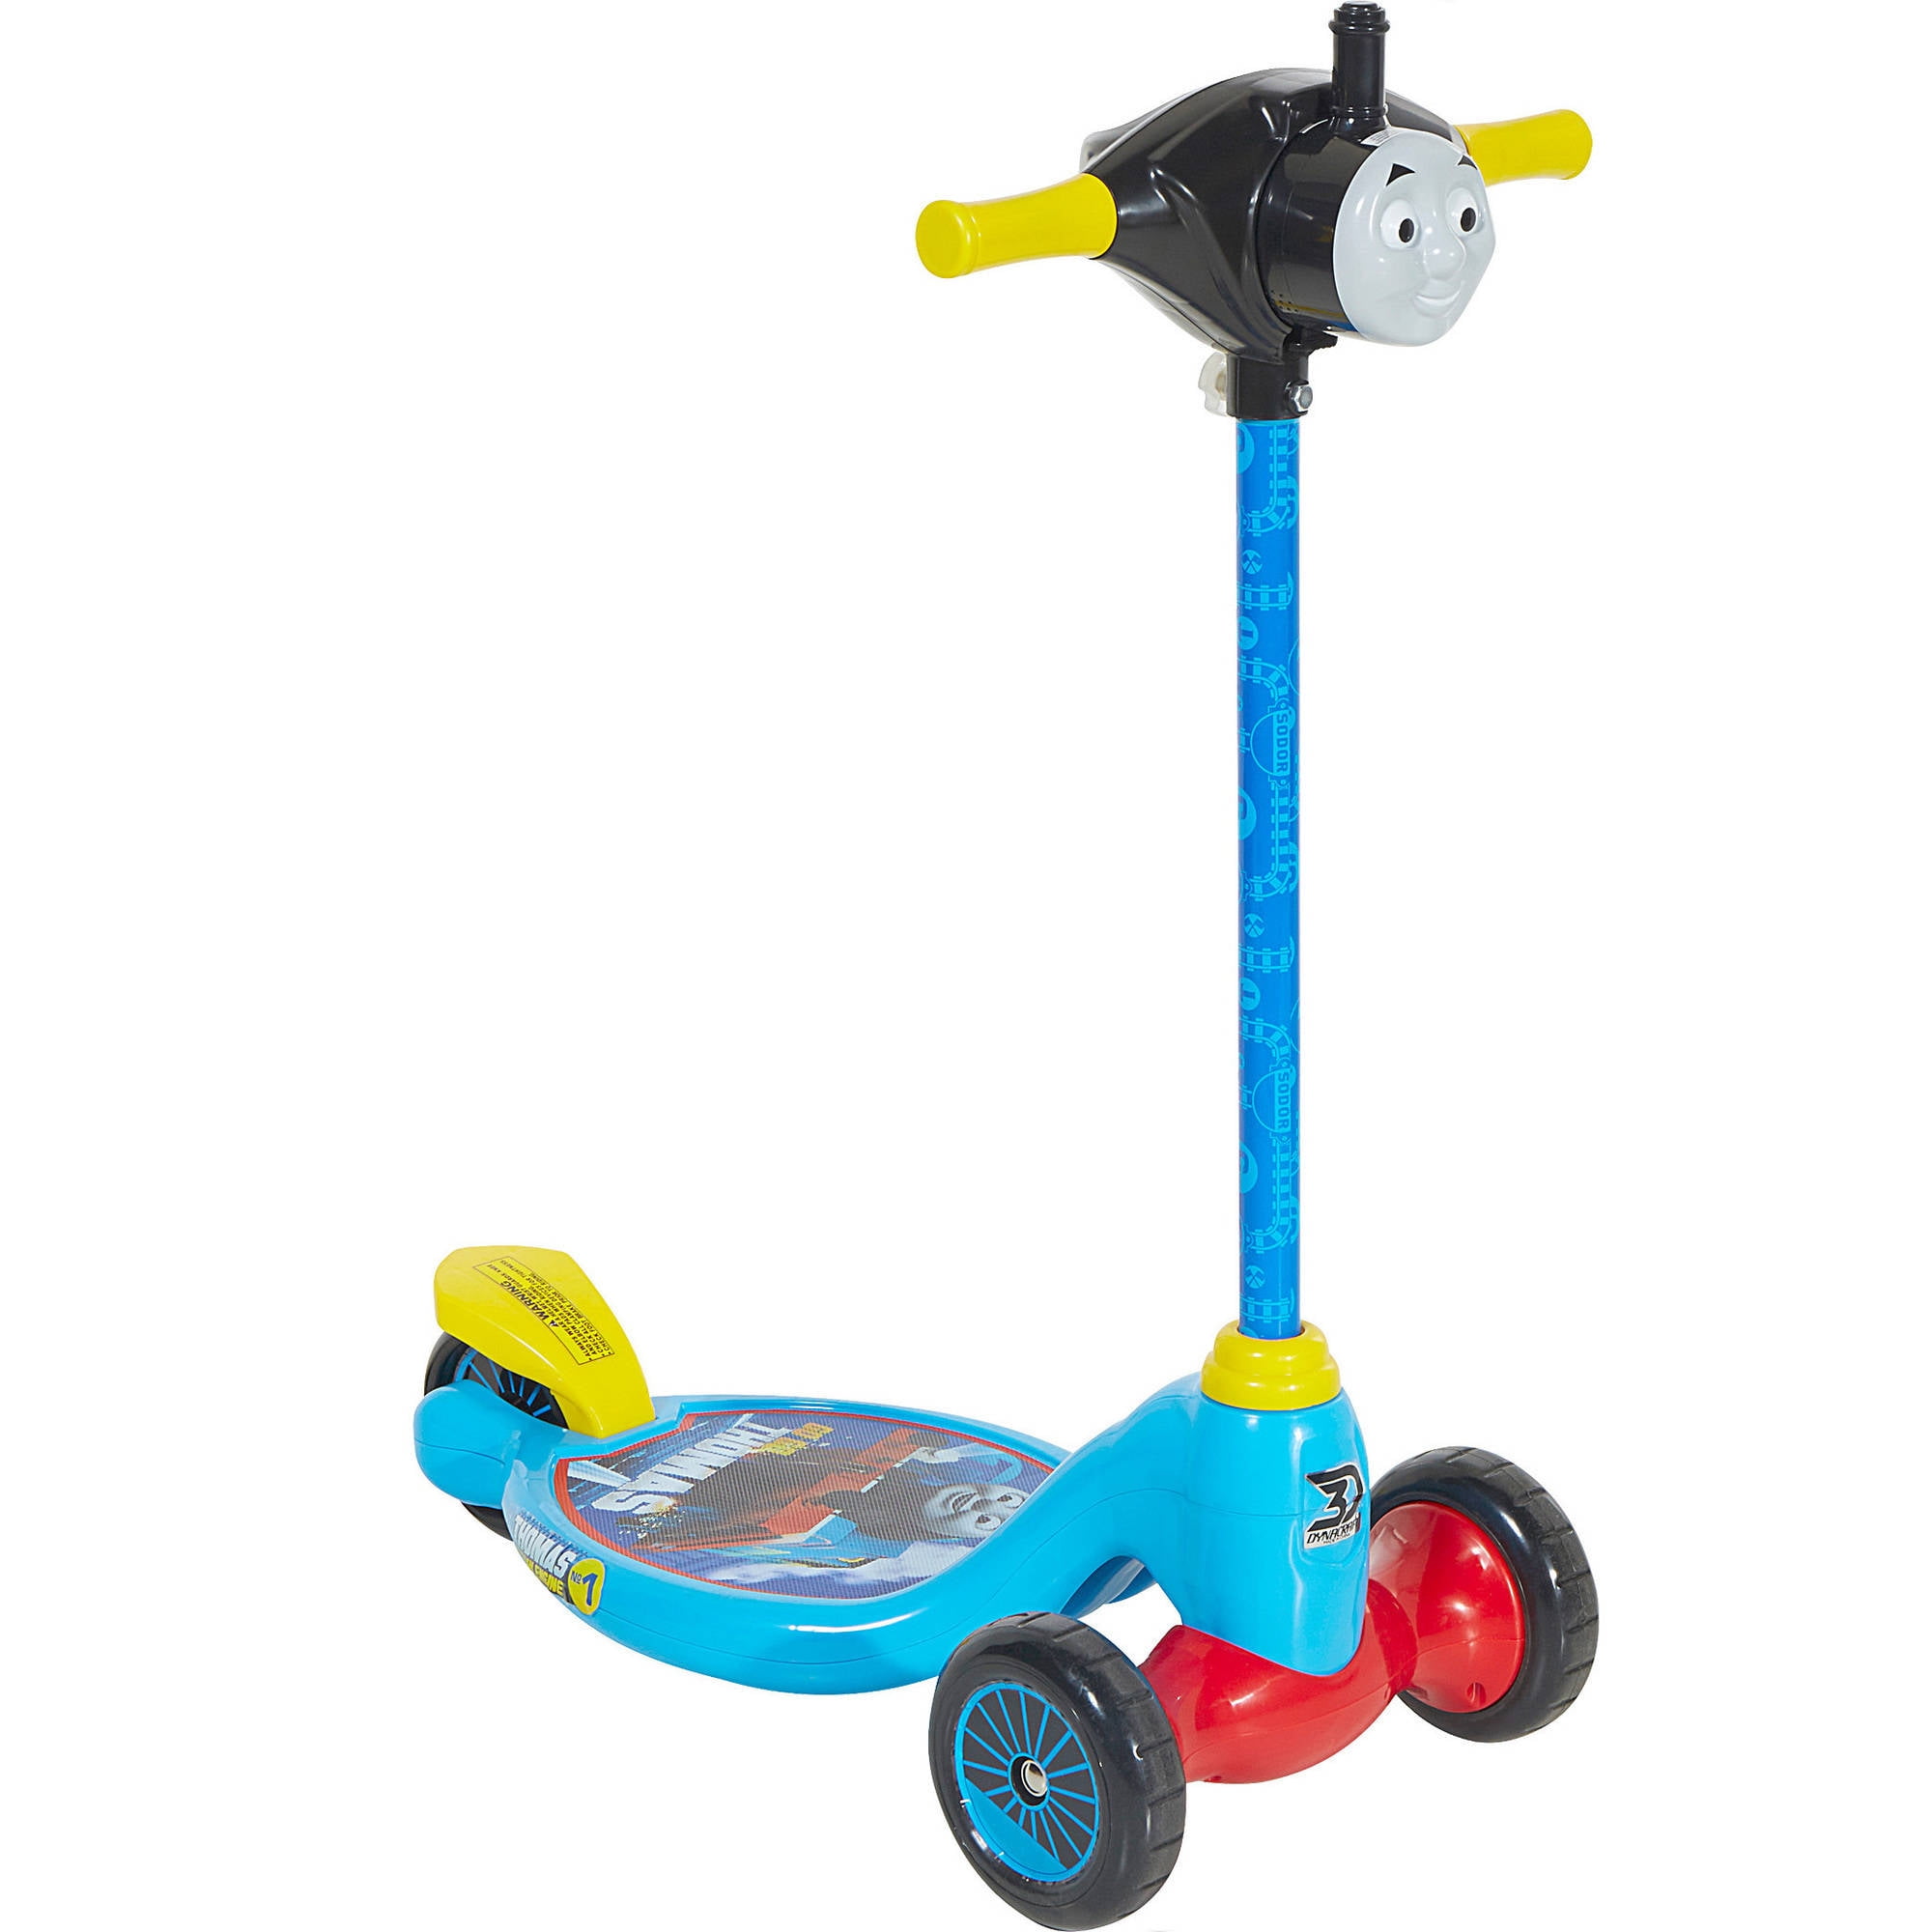 Thomas the Tank Engine 3 wheels Brand new All Aboard Lean & Glide Scooter 